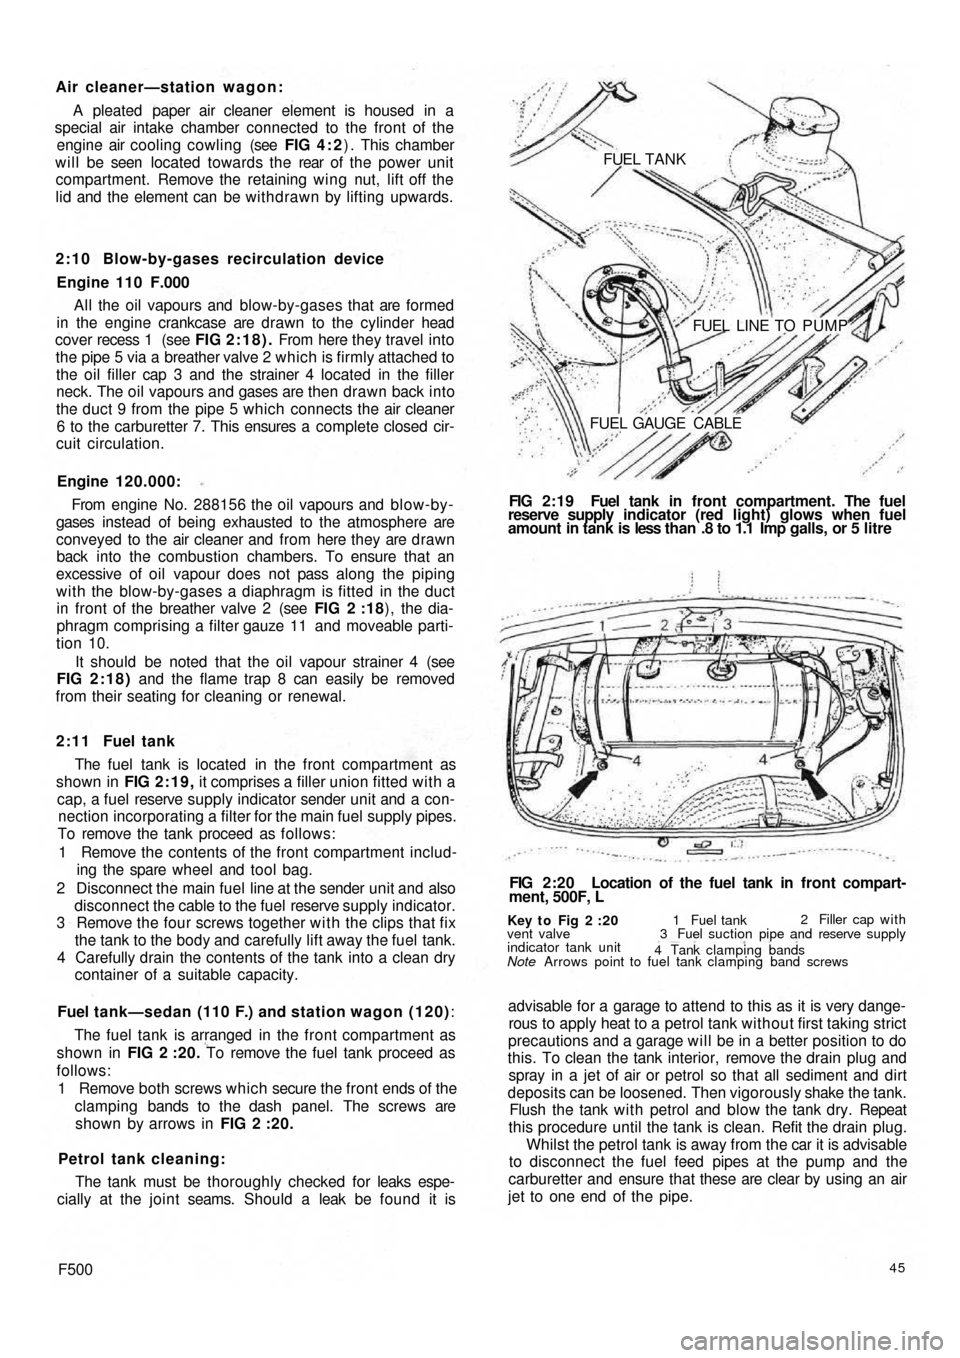 FIAT 500 1969 1.G Workshop Manual Air cleaner—station wagon:
A pleated paper air cleaner element is housed  in a
special air intake chamber connected to the front of the
engine air cooling cowling (see FIG 4 : 2) . This chamber
will